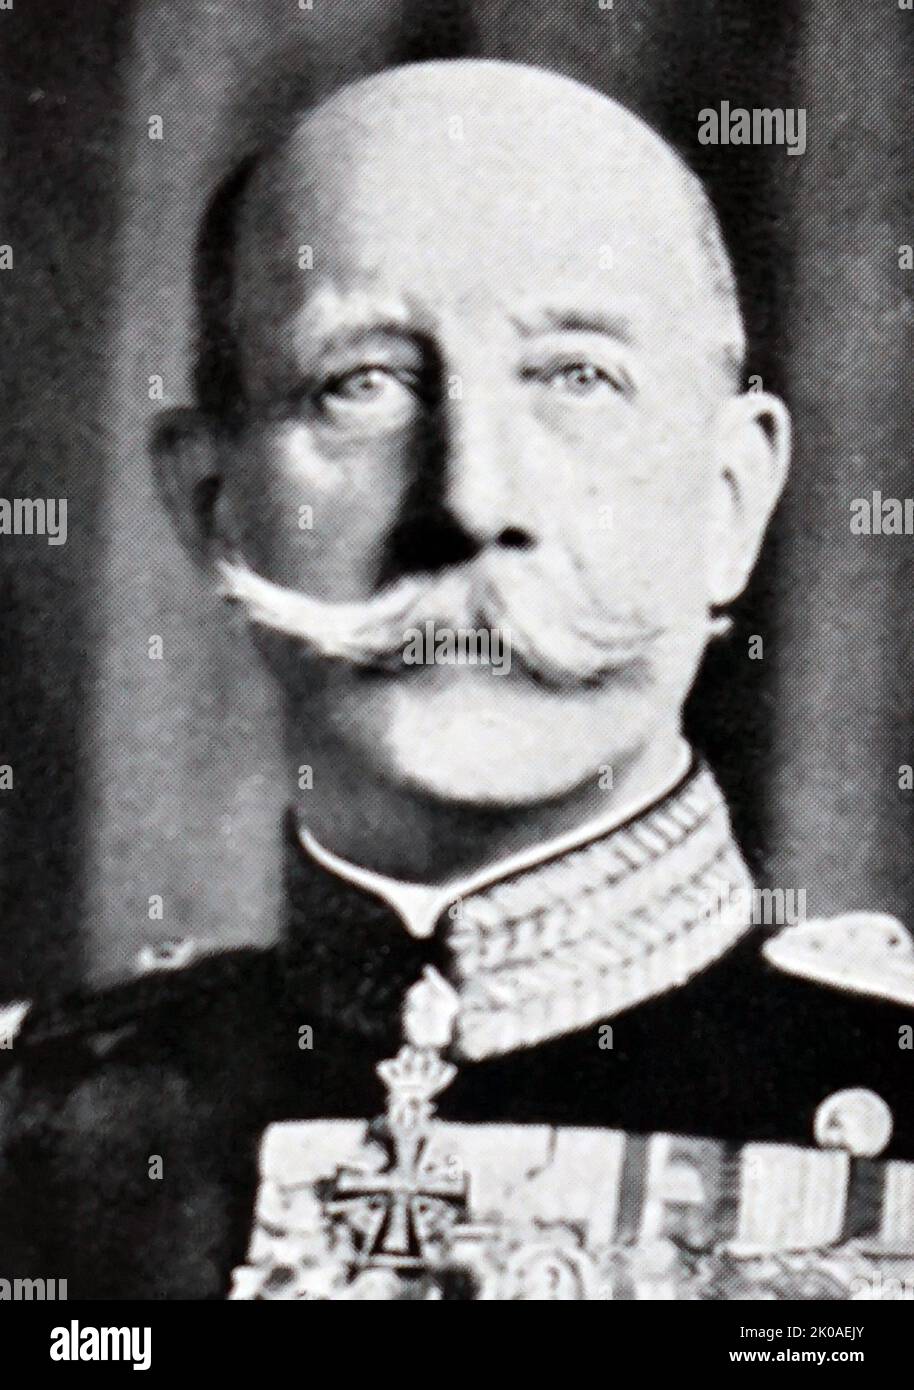 George I (1845 - 1913) King of Greece from 30 March 1863 until his assassination in 1913. George's reign of almost 50 years (the longest in modern Greek history) was characterized by territorial gains as Greece established its place in pre-World War I Europe Stock Photo